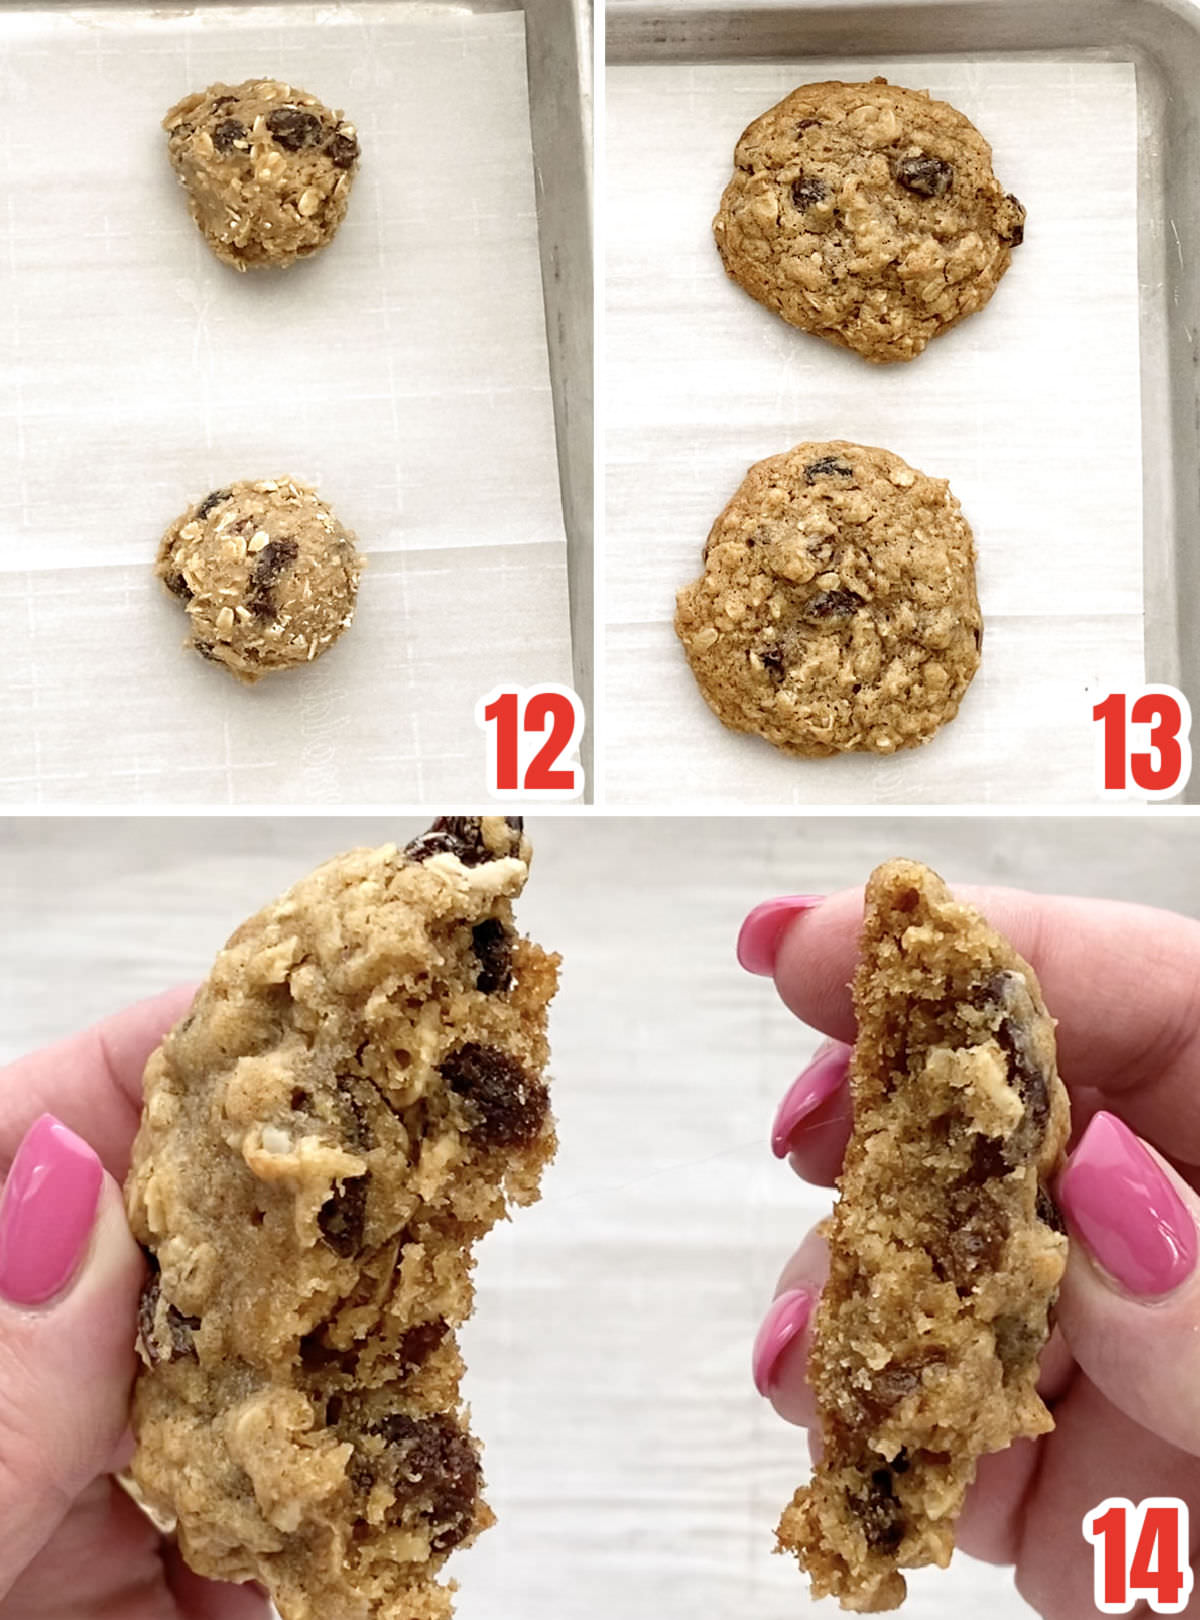 Collage image showing the Oatmeal Cookies before they go in the oven and after they come out of the oven.